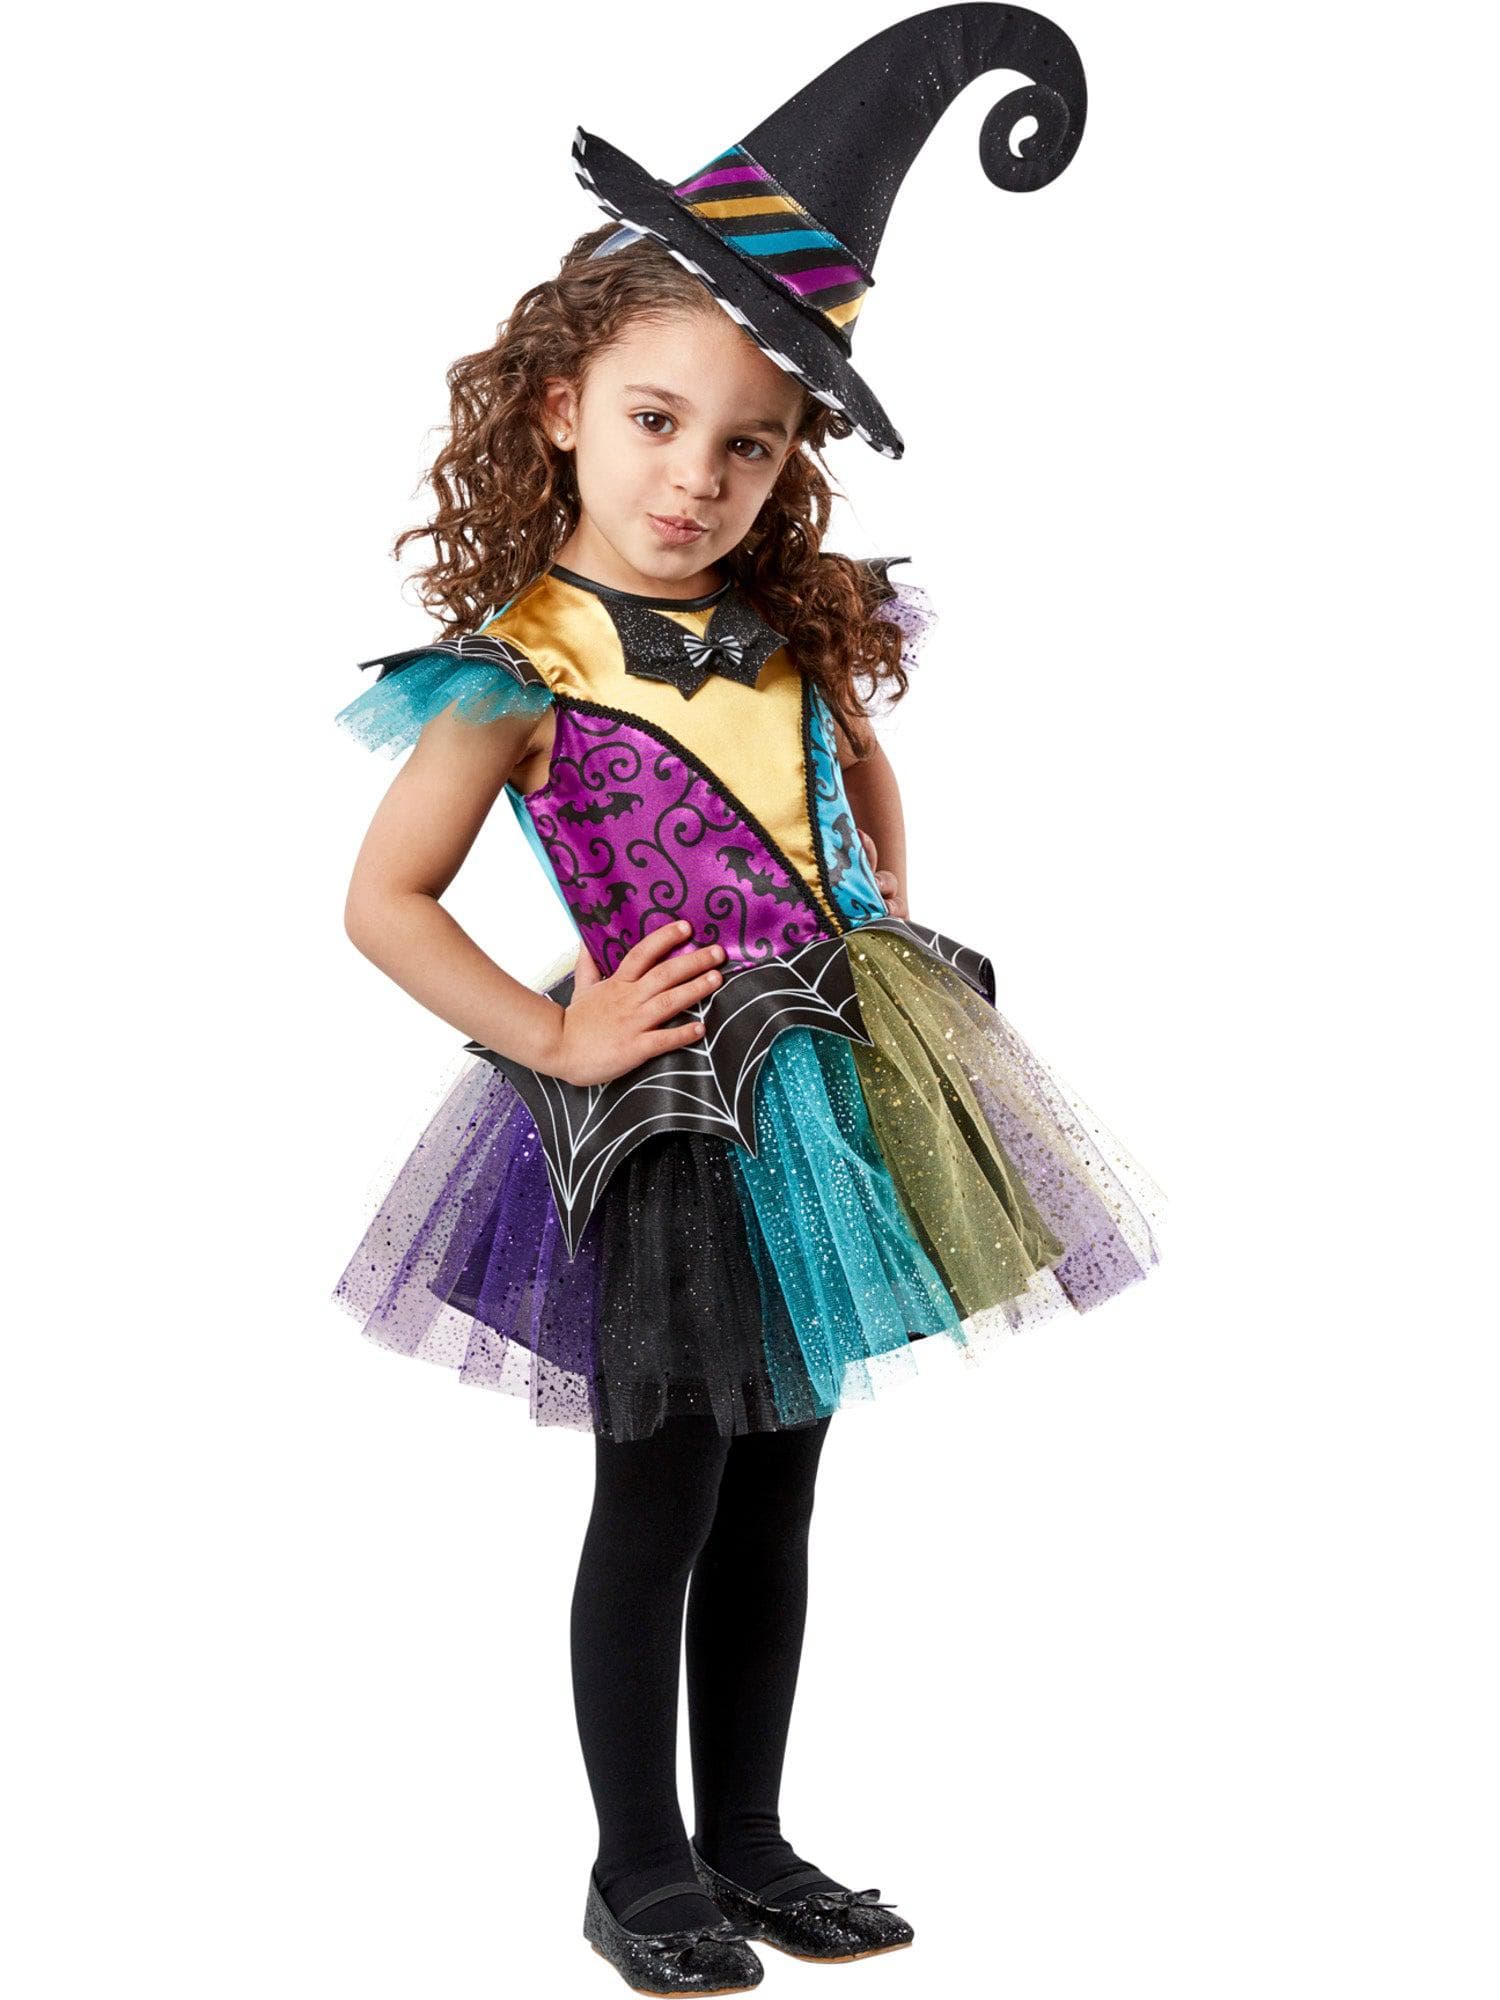 Patchwork Witch Costume for Toddlers - costumes.com